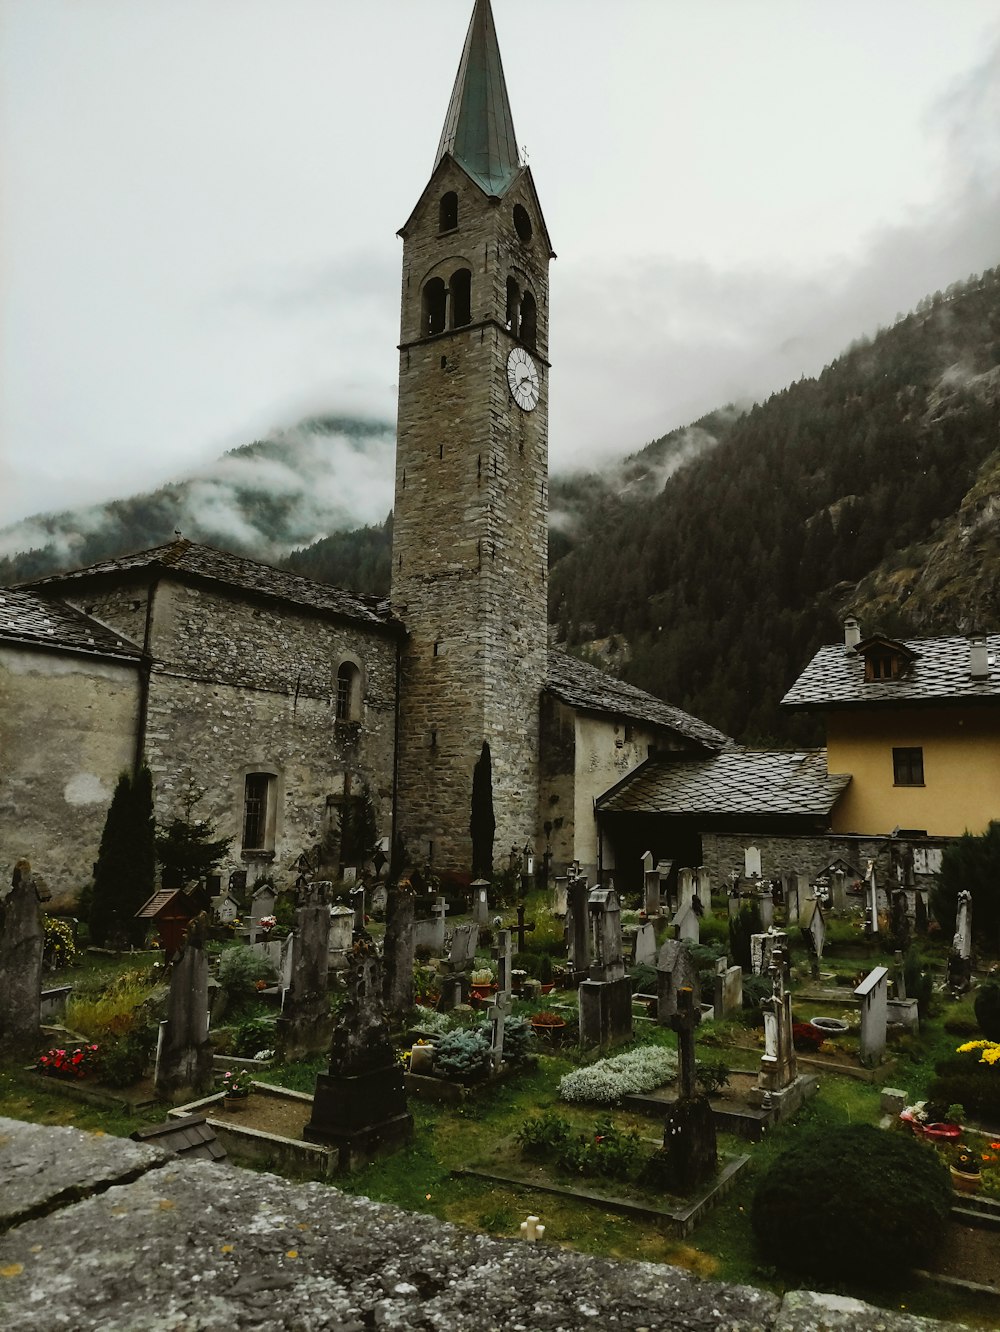 a clock tower on a stone building